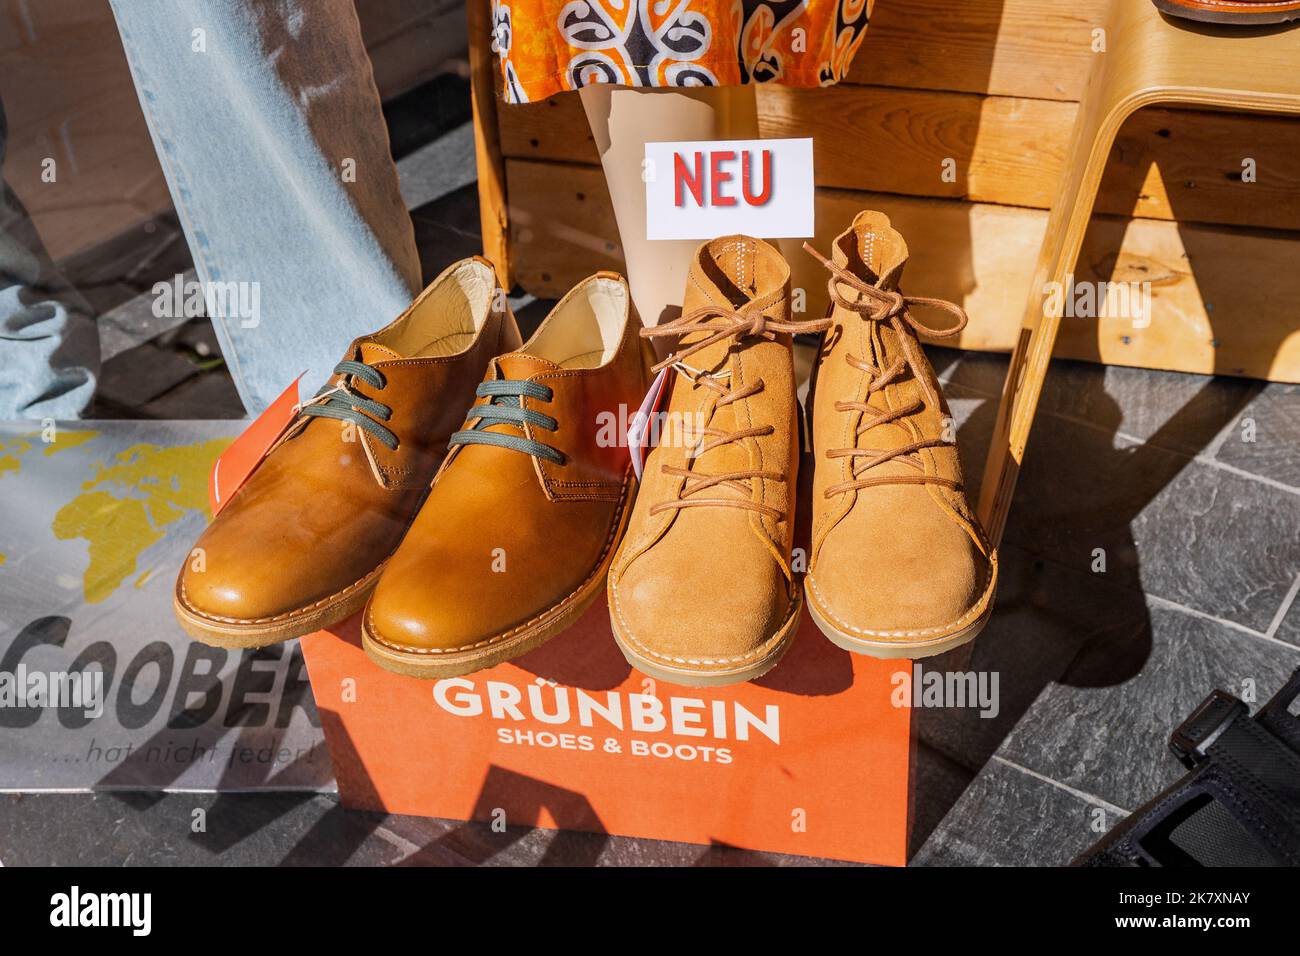 24 July 2022, Osnabruck, Germany: German Grunbein boots and leather shoes  for sale in shop Stock Photo - Alamy